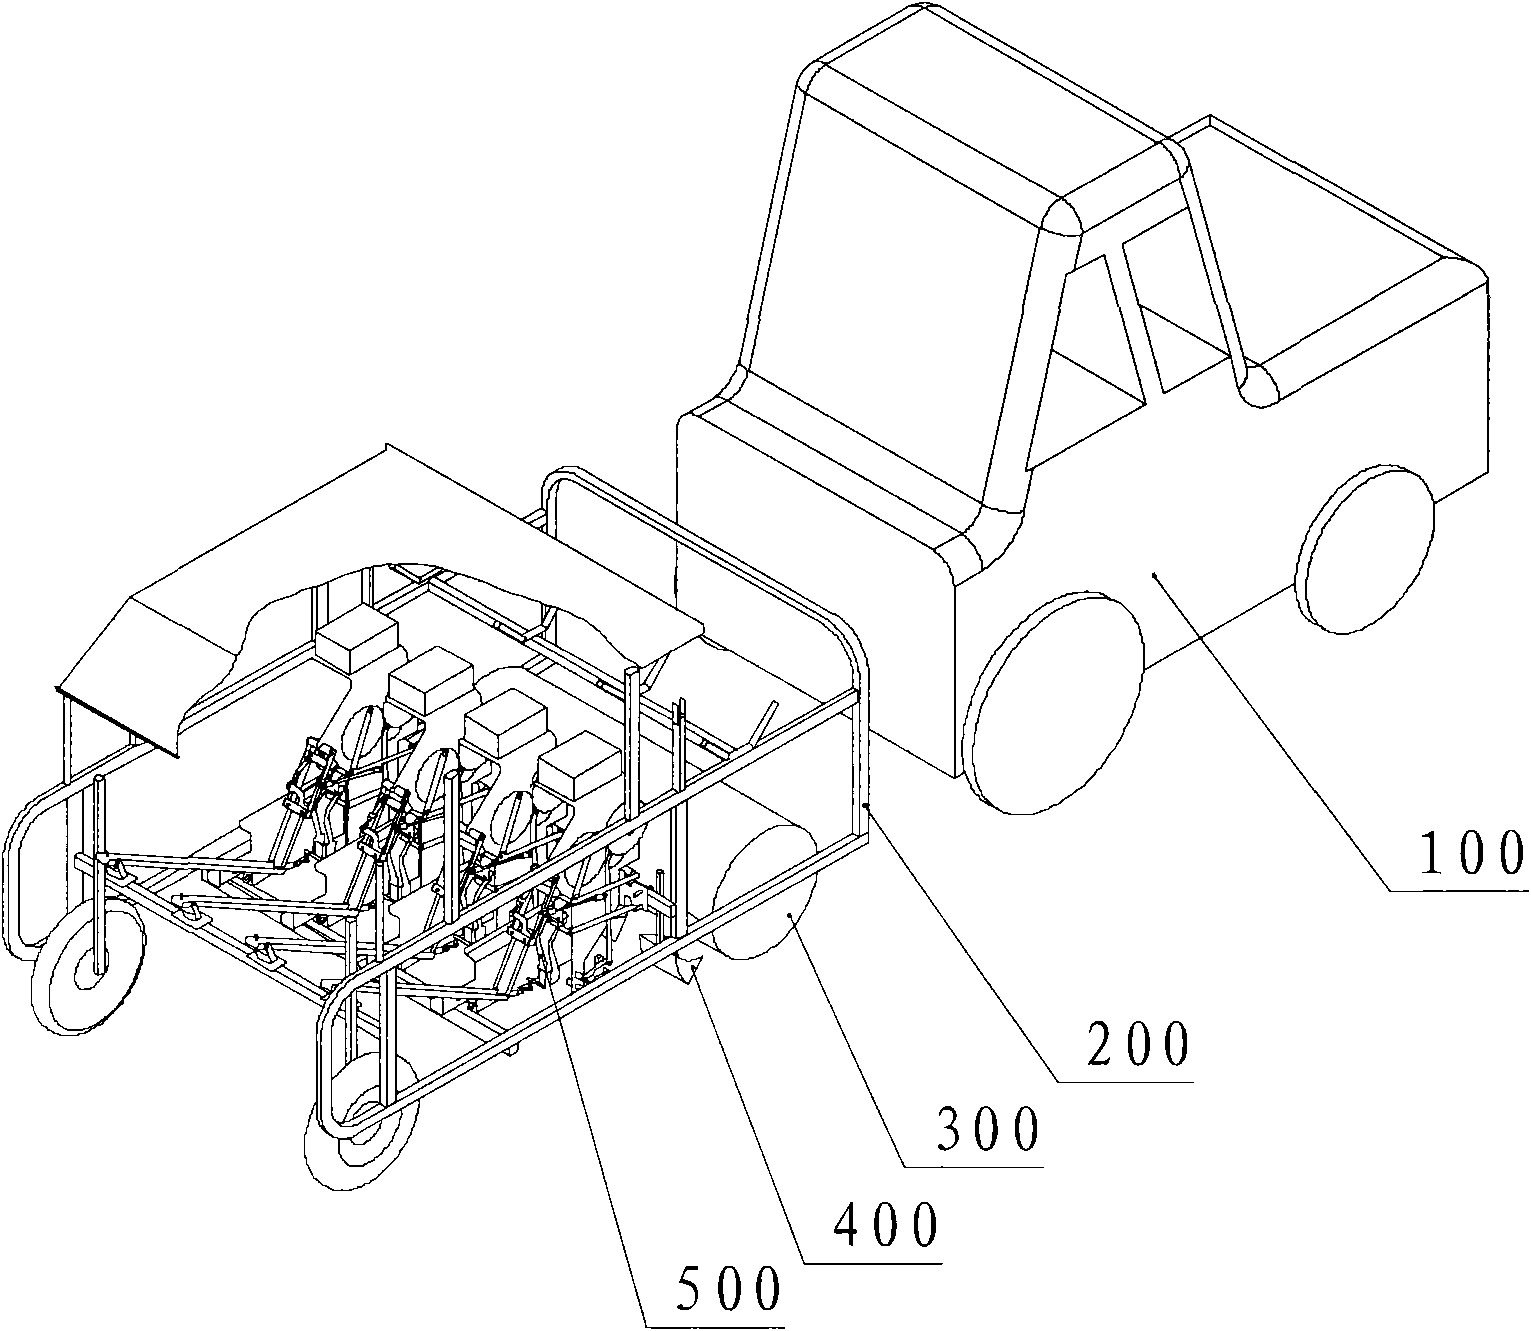 Pot seedling planting device and pot seedling transplanting machine with the same